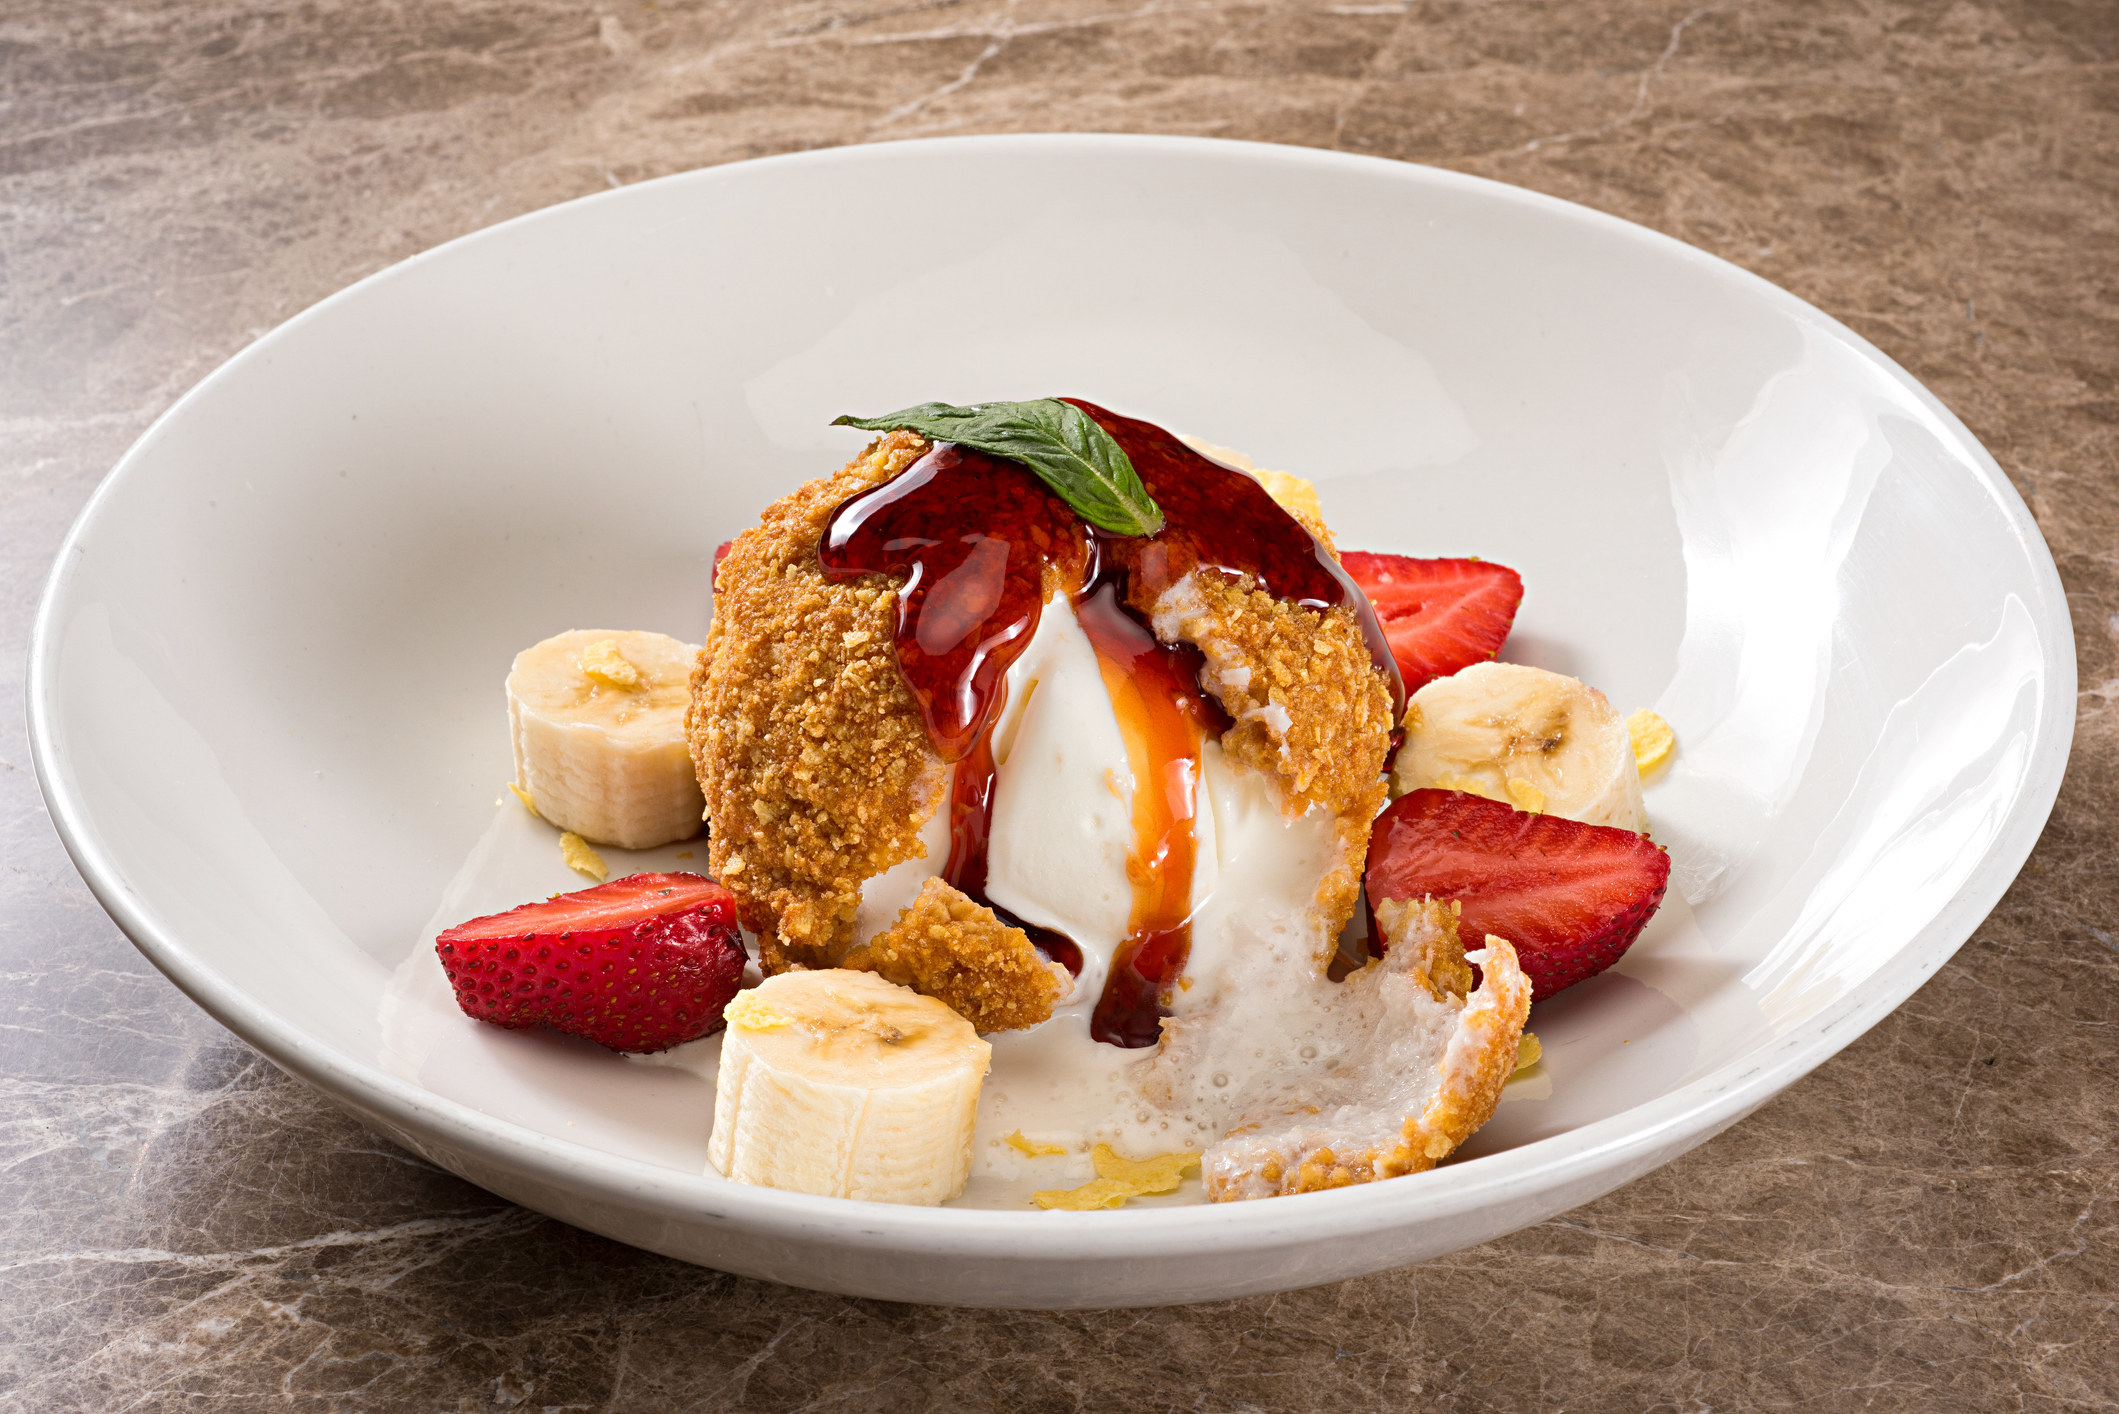 Fried ice cream with banana and strawberries